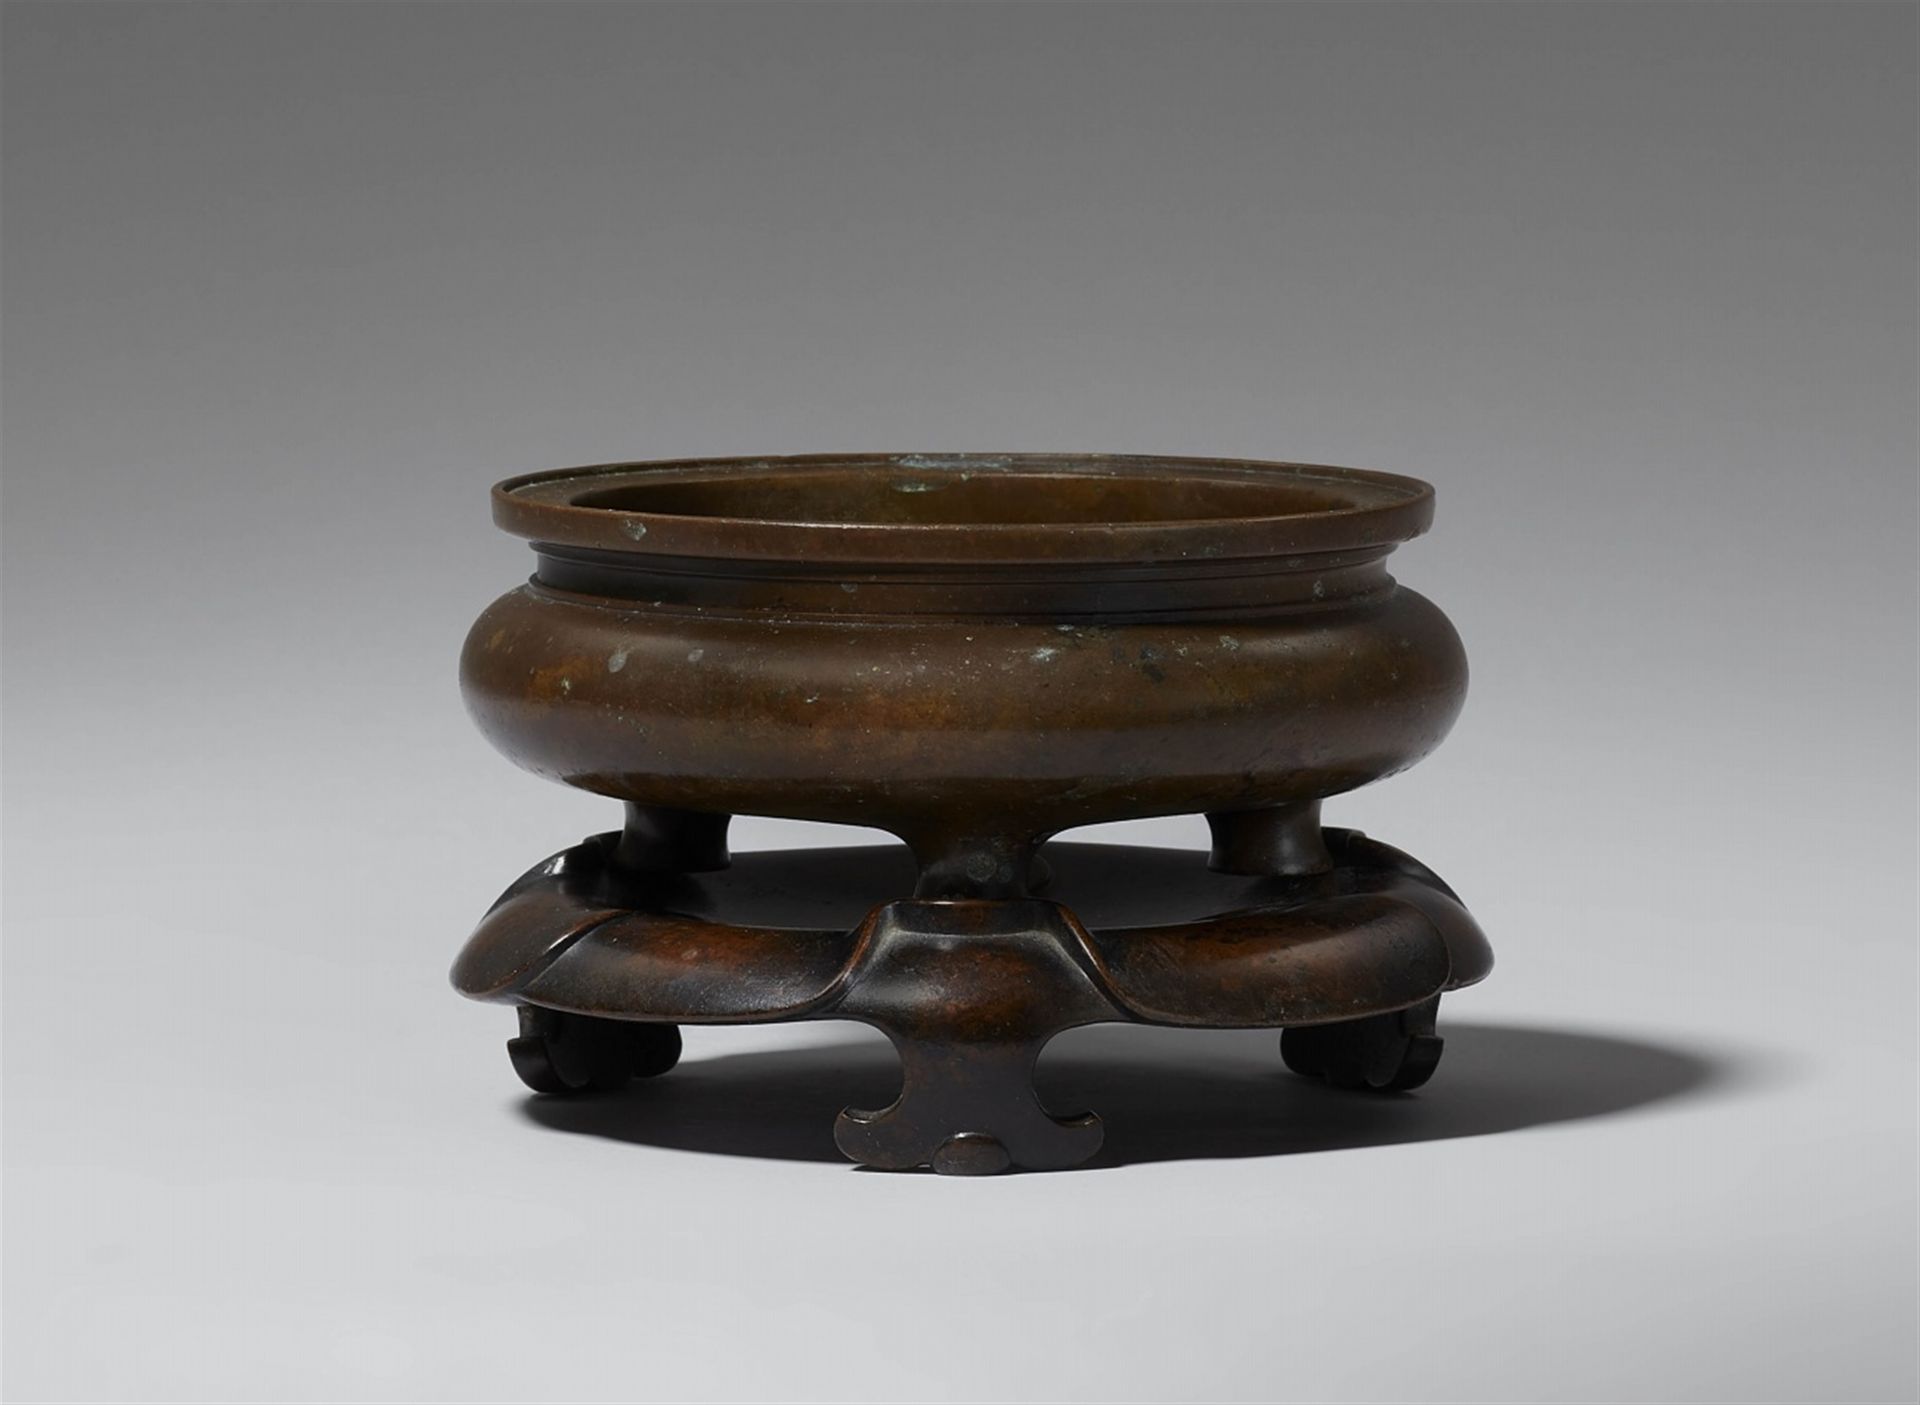 Null A bronze incense burner and stand. Qing dynasty, possibly 18th century



O&hellip;